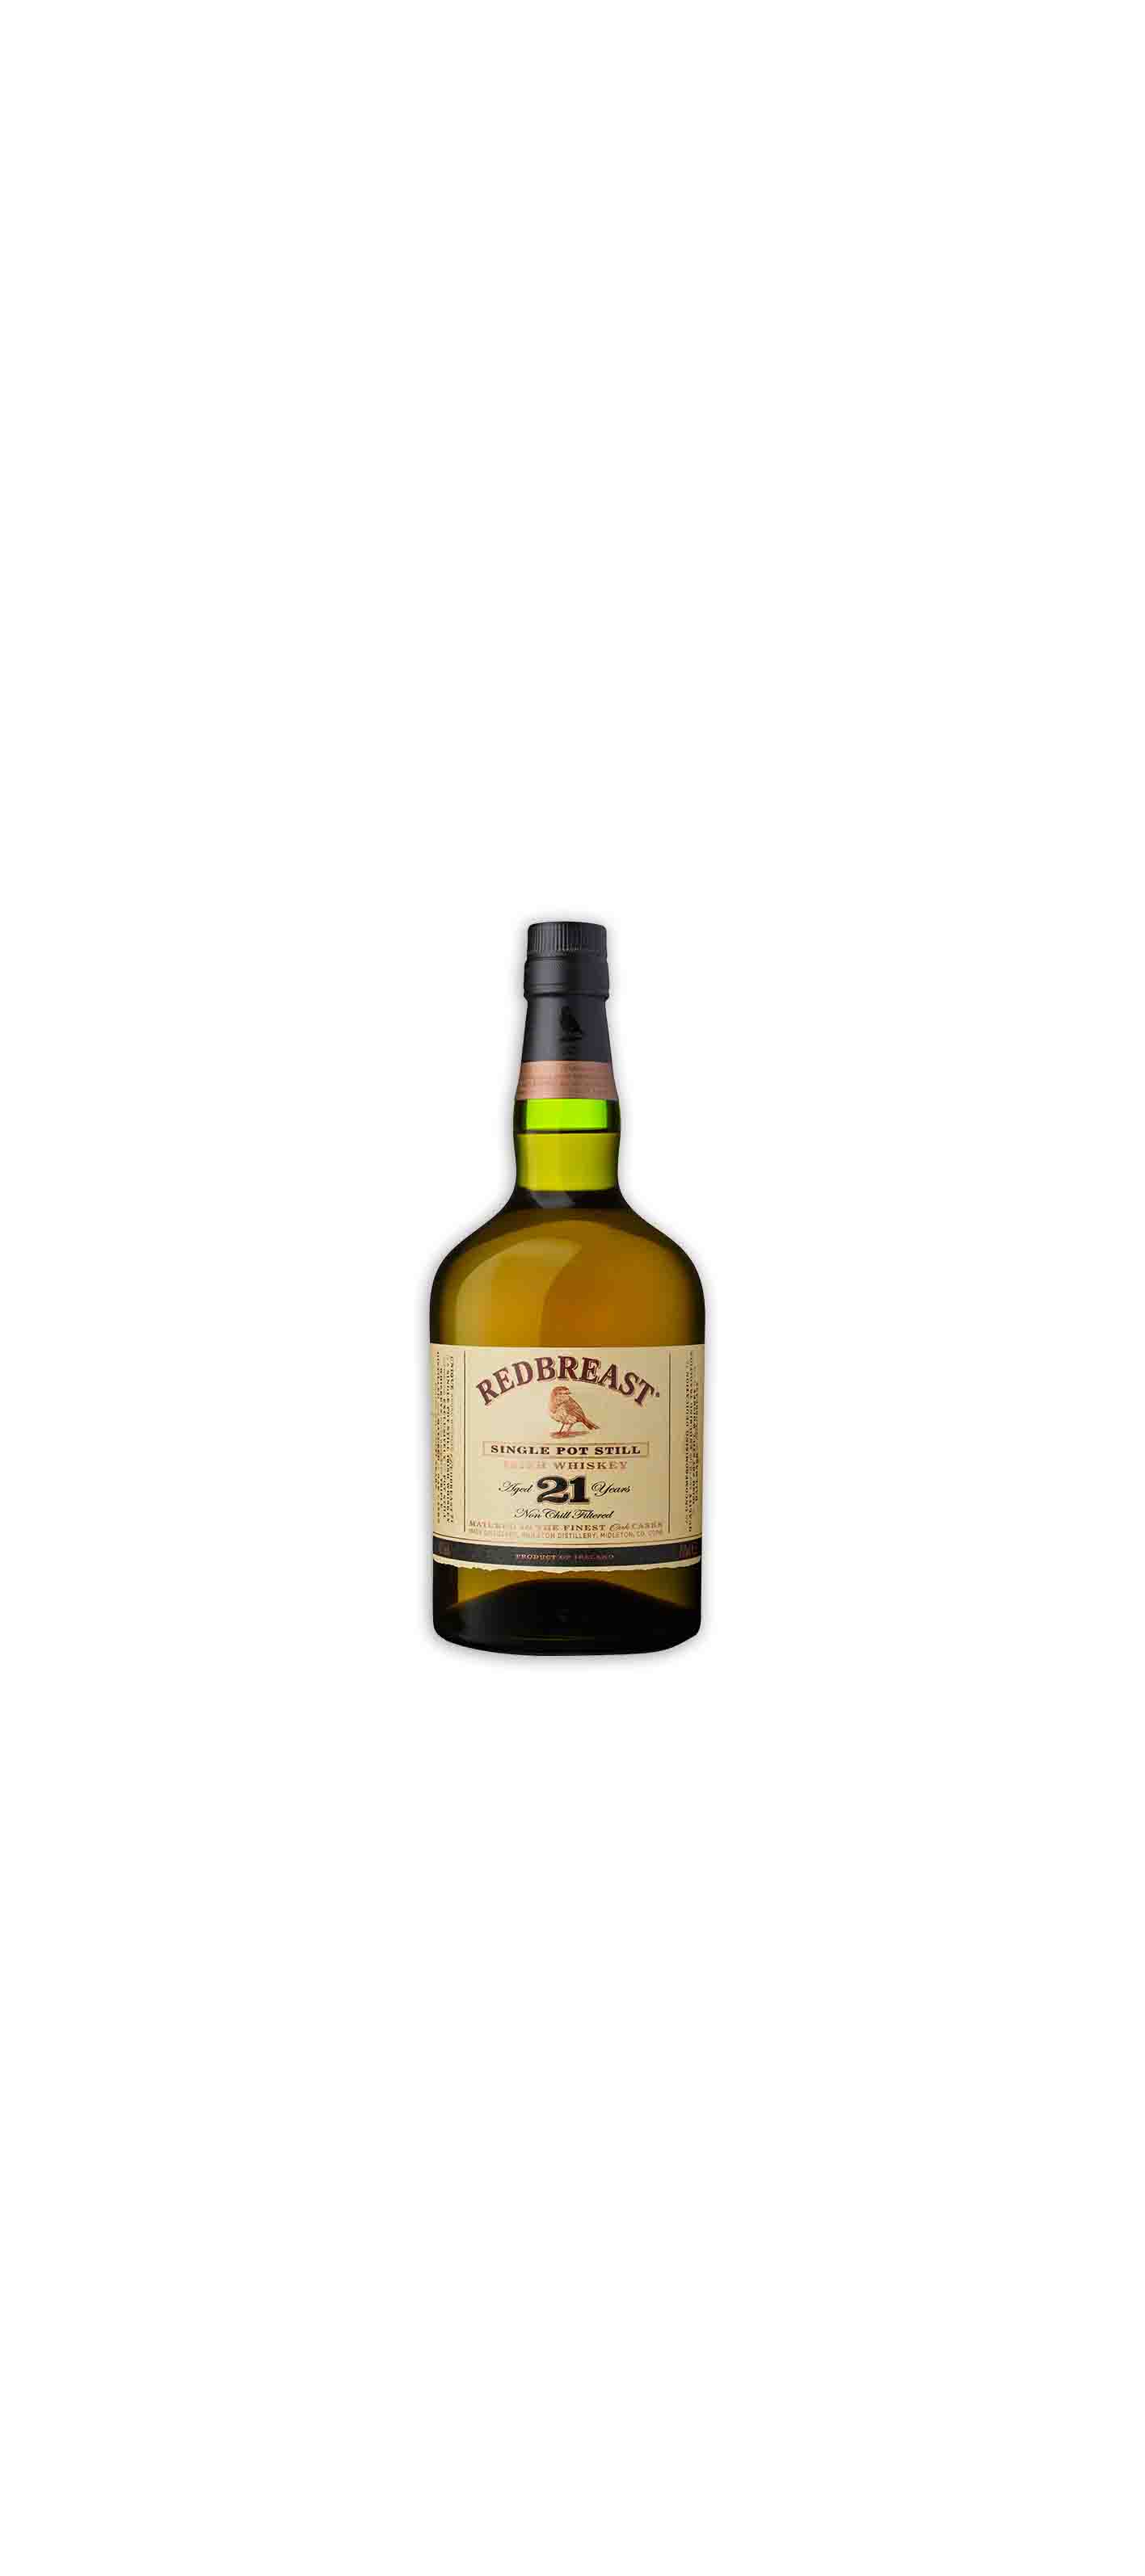 “Redbreast 21 Years-Old is the ultimate expression of the renowned Redbreast range which has placed Irish whiskey in the top echelons of world whiskeys”.